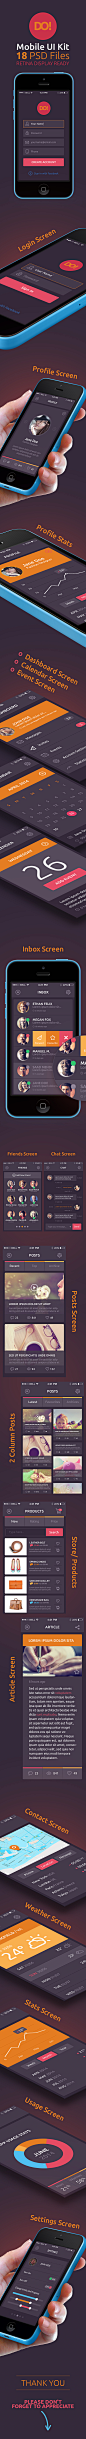 DO! | Mobile UI Kit  | UI/UX & Art Direction : DO! Mobile App UI Kit interface is 19 PSD high resolution, retina display ready, fully shape/vector layered photoshop files, easy and completely customizable.Dimension: 640×1136 pixelFeatures:UI kit inclu